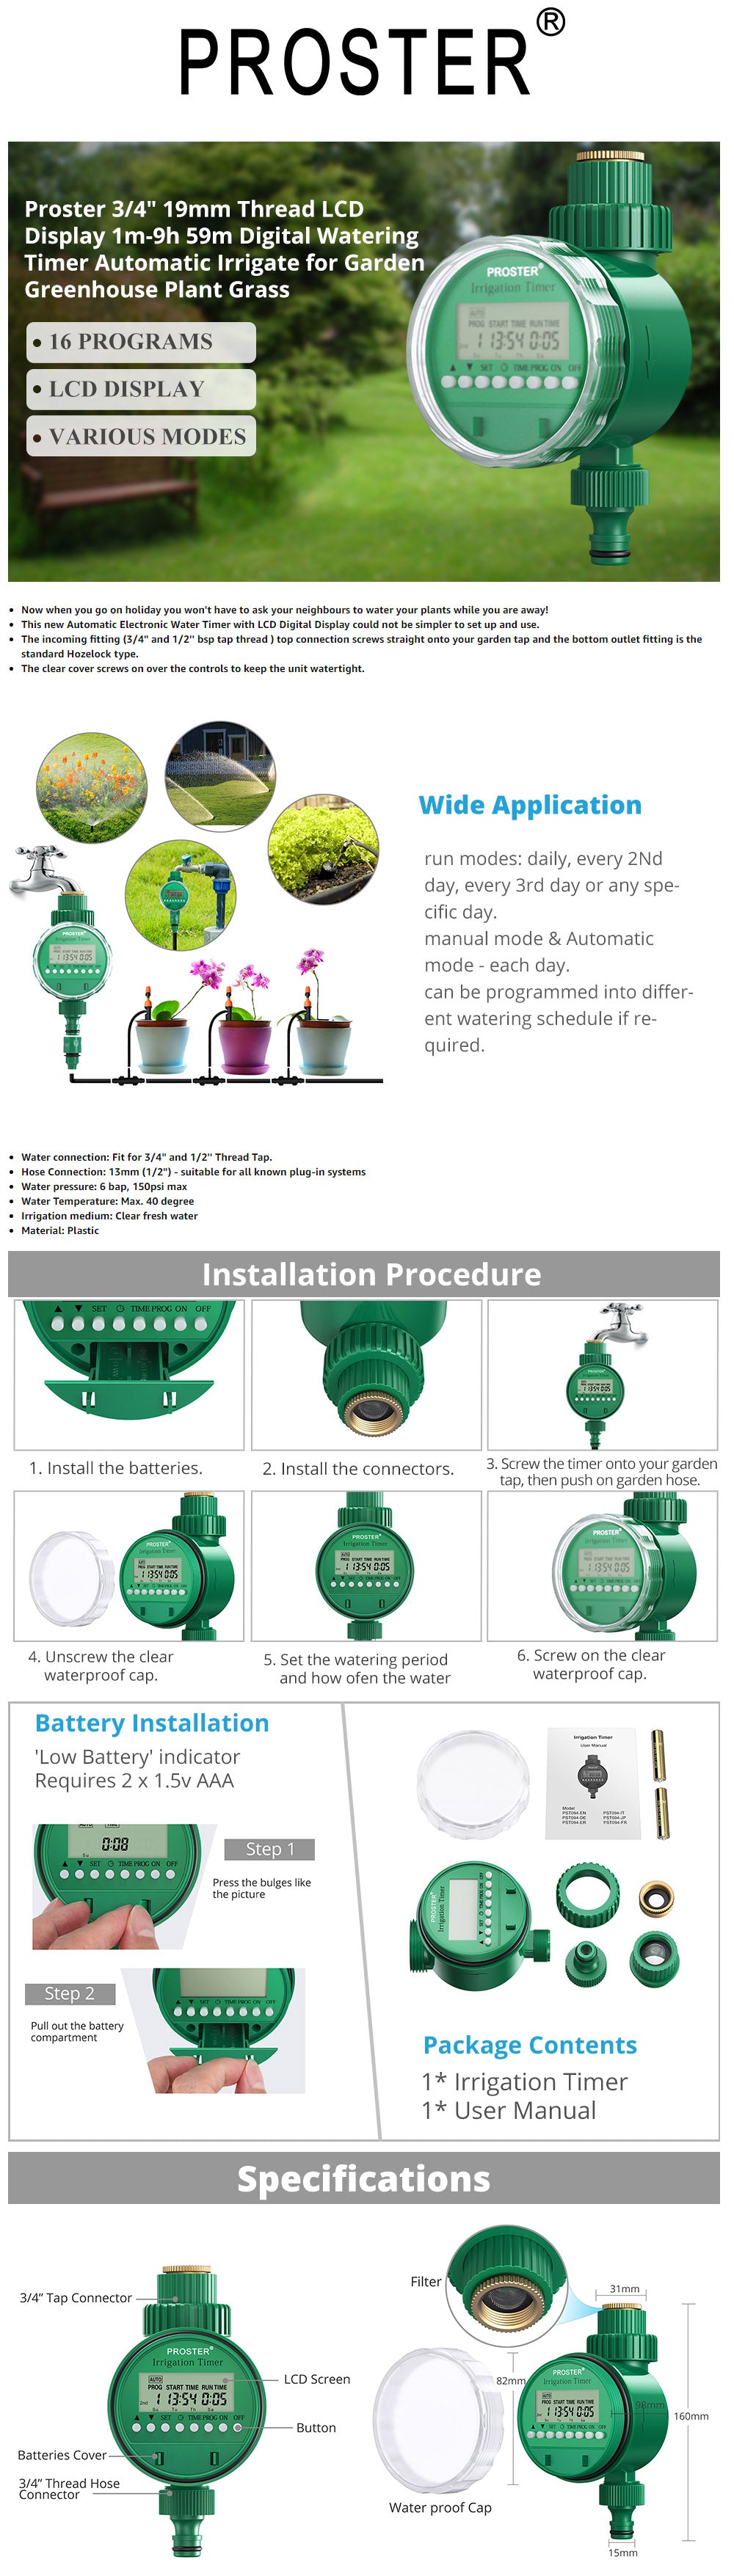 Proster Water Timer 3/4" 19mm Thread Automatic Irrigation Timer with LCD Display 1m - 9h 59m Digital Watering Timer Automatic Irrigate for Garden Greenhouse Plant Grass